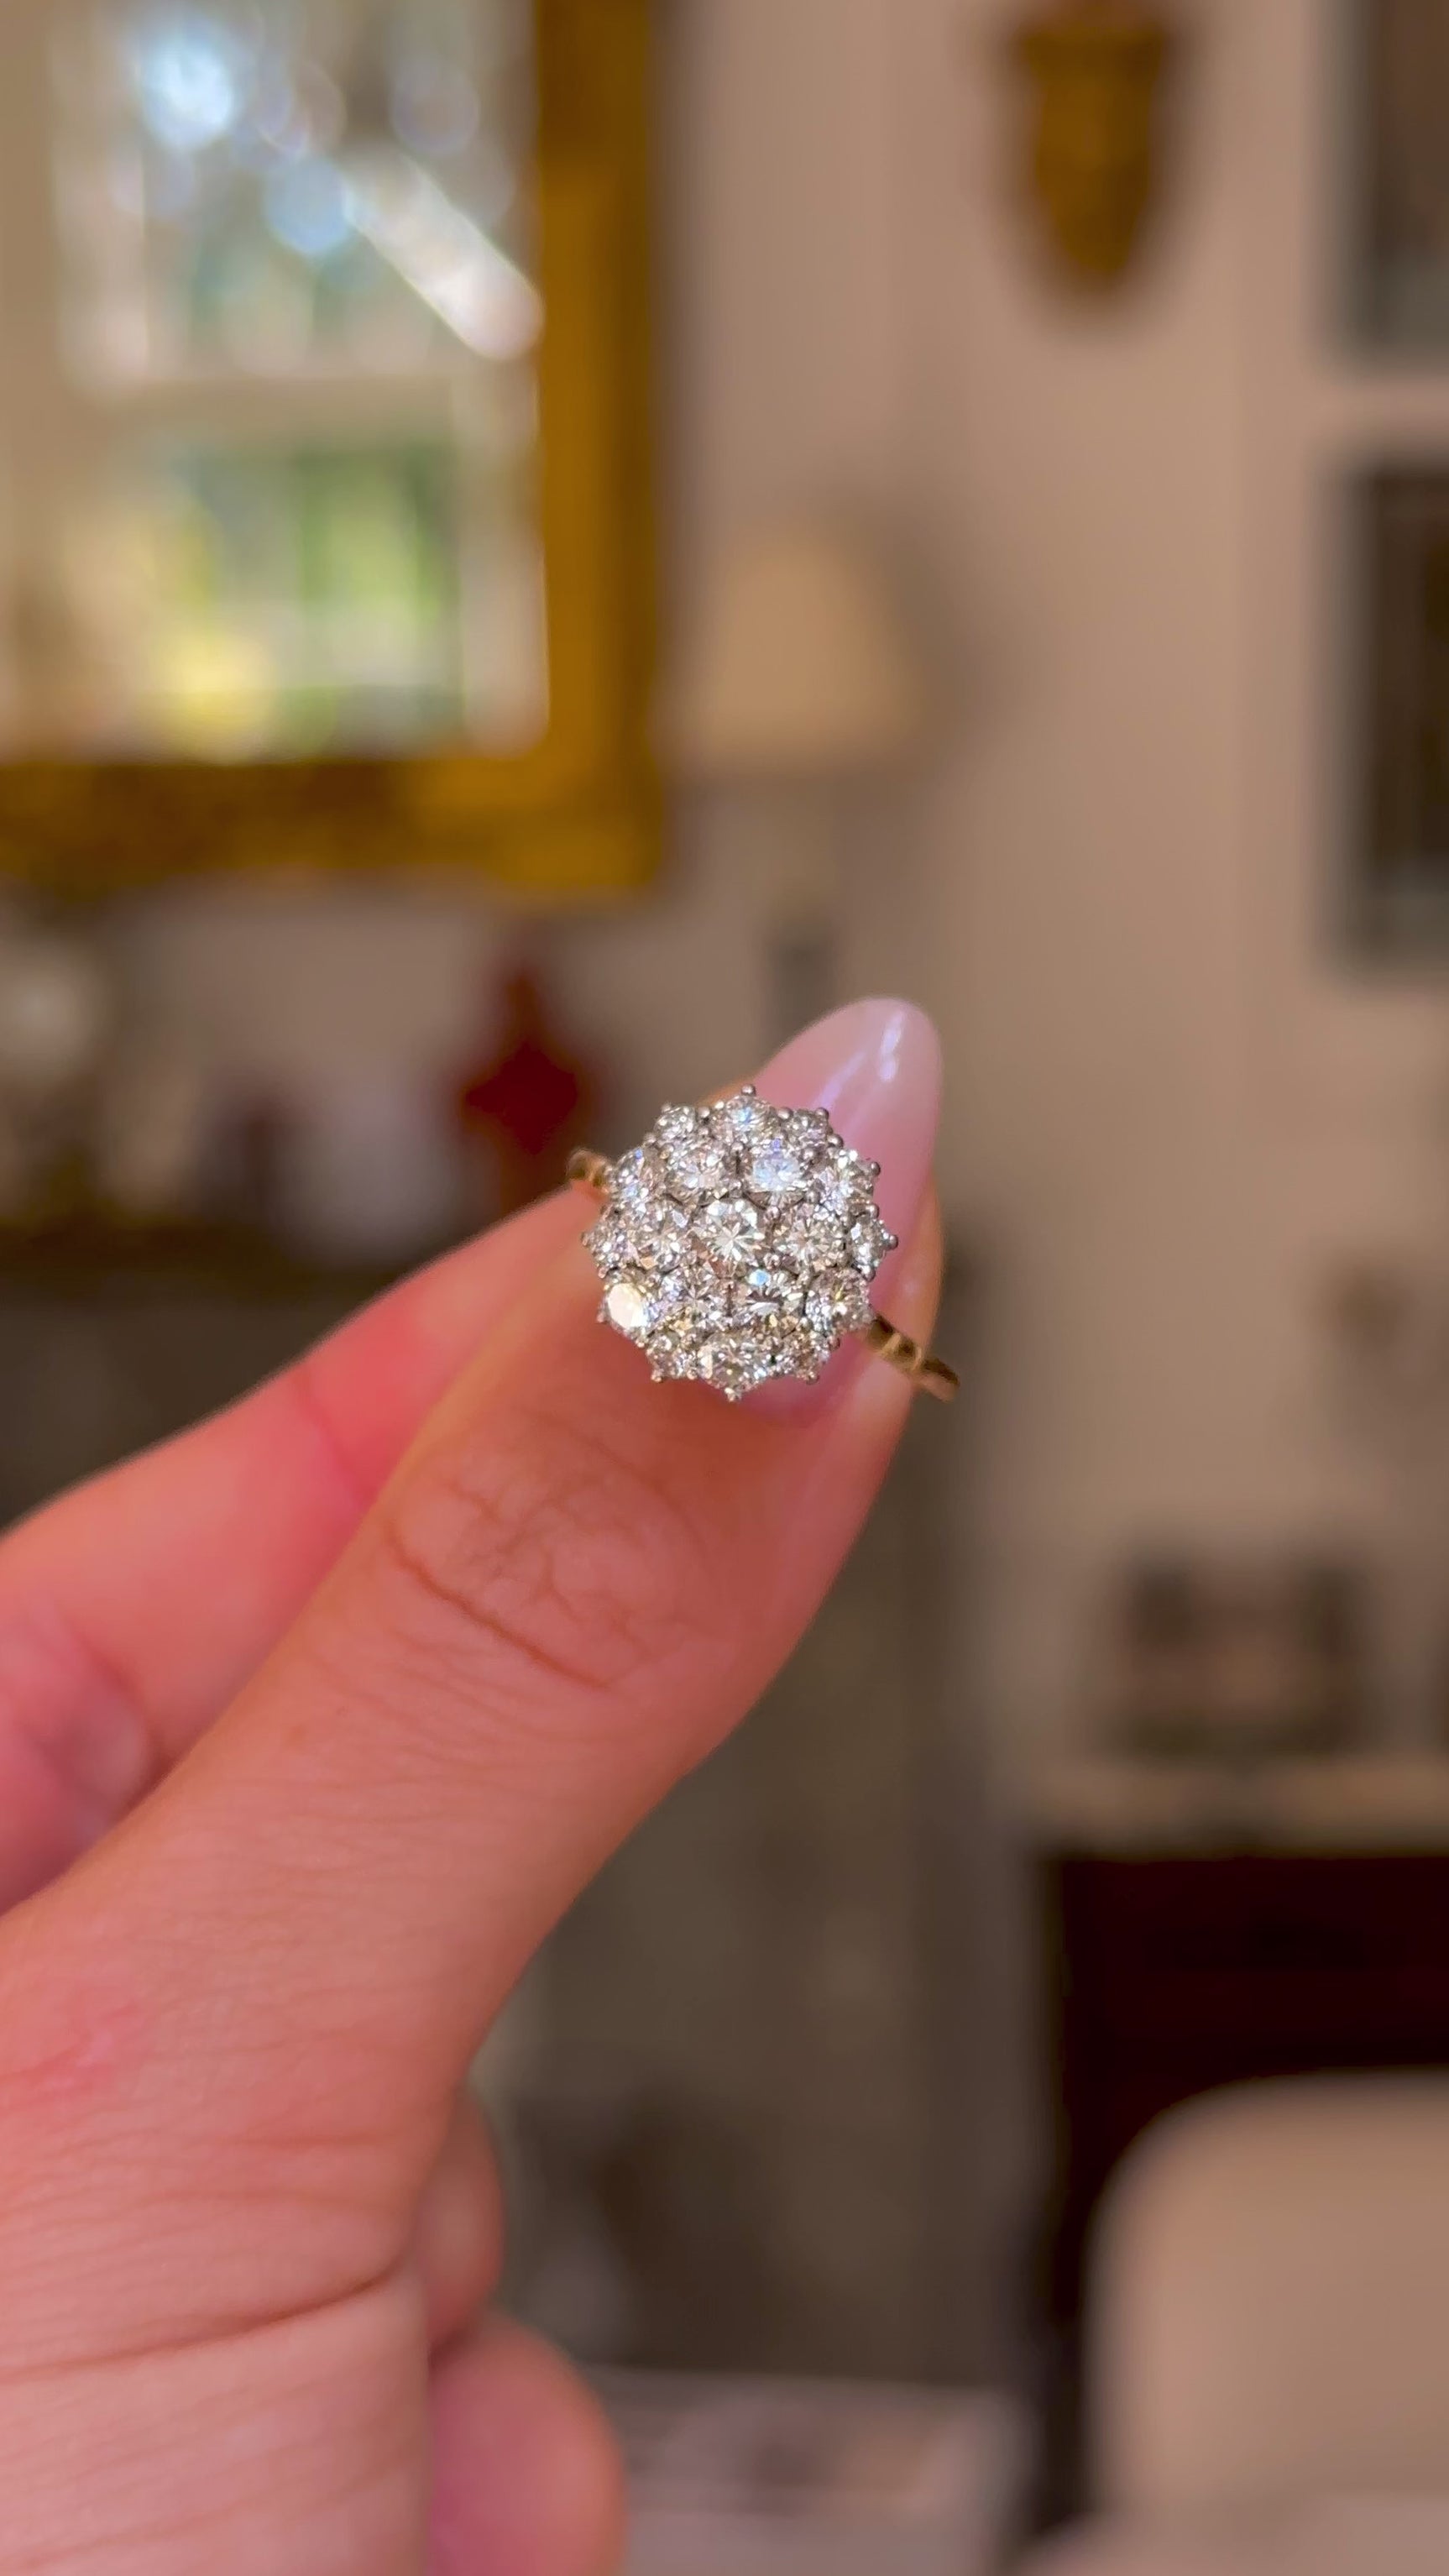 1980s diamond cluster engagement ring worn in fingers and moved around to give perspective.